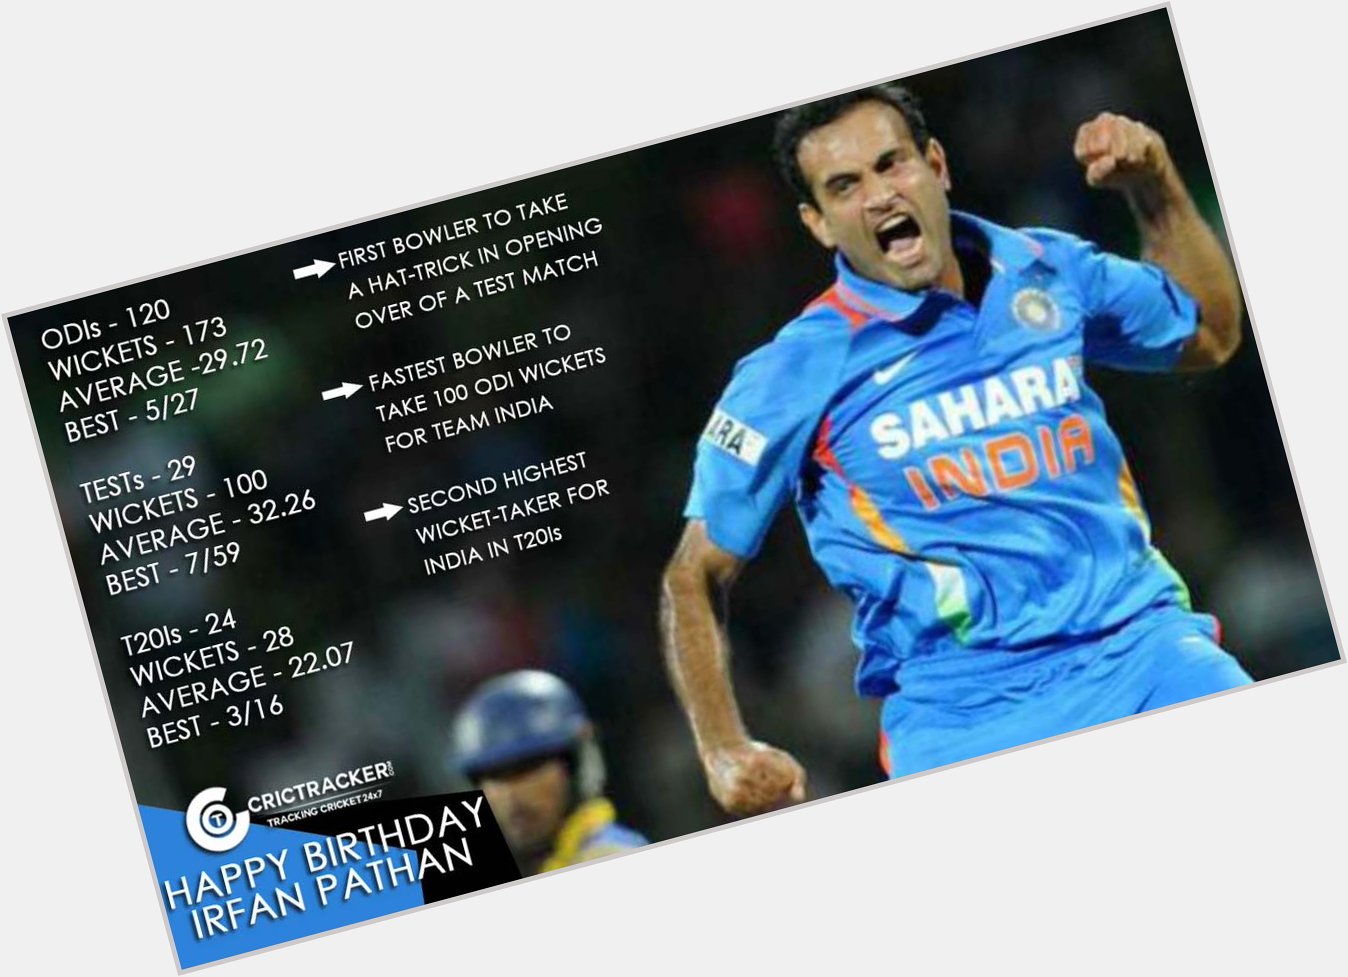 Happy Birthday \"Irfan Pathan\"

On his 31st Birthday, Here are the Facts about Irfan Pathan:  